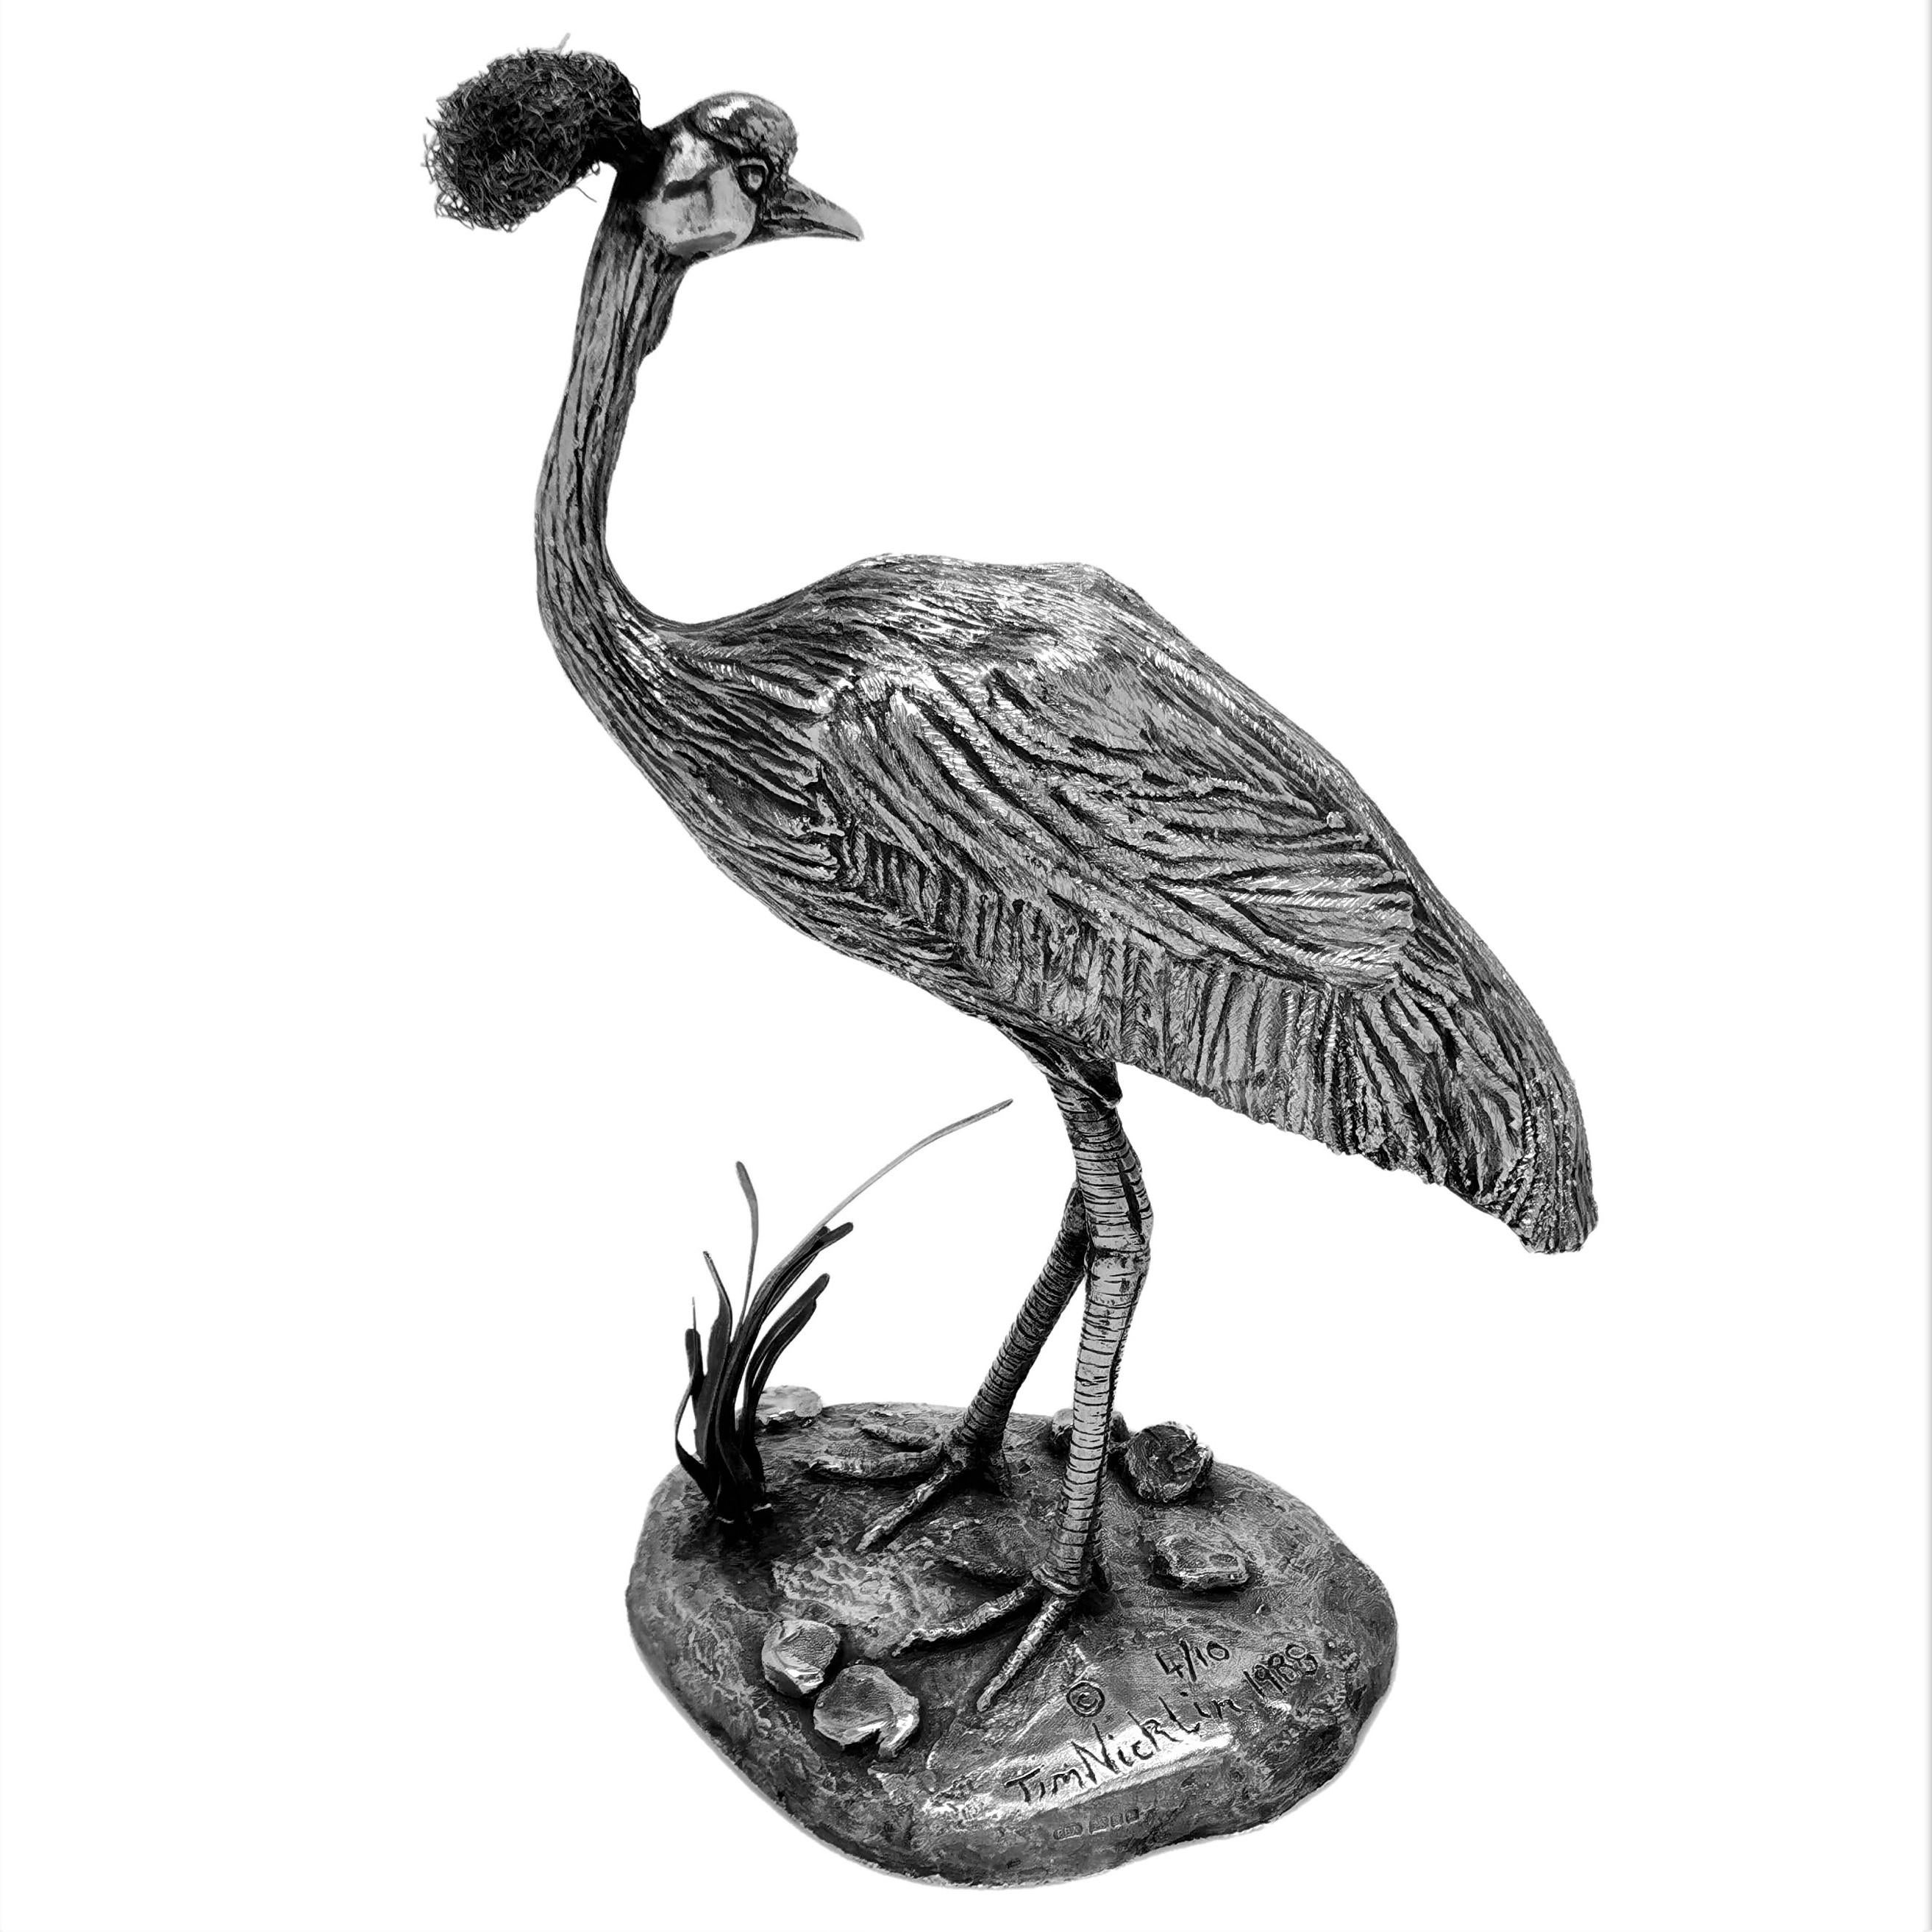 An impressive sterling silver model of an African crowned crane by Kenyan Sculptor Tim Nicklin.

The Model was sculpted by Tim Nicklin in 1988 and Hallmarked in London in 1990. The crane is edition 4 of 10.

Measures: Weight - 1868g /